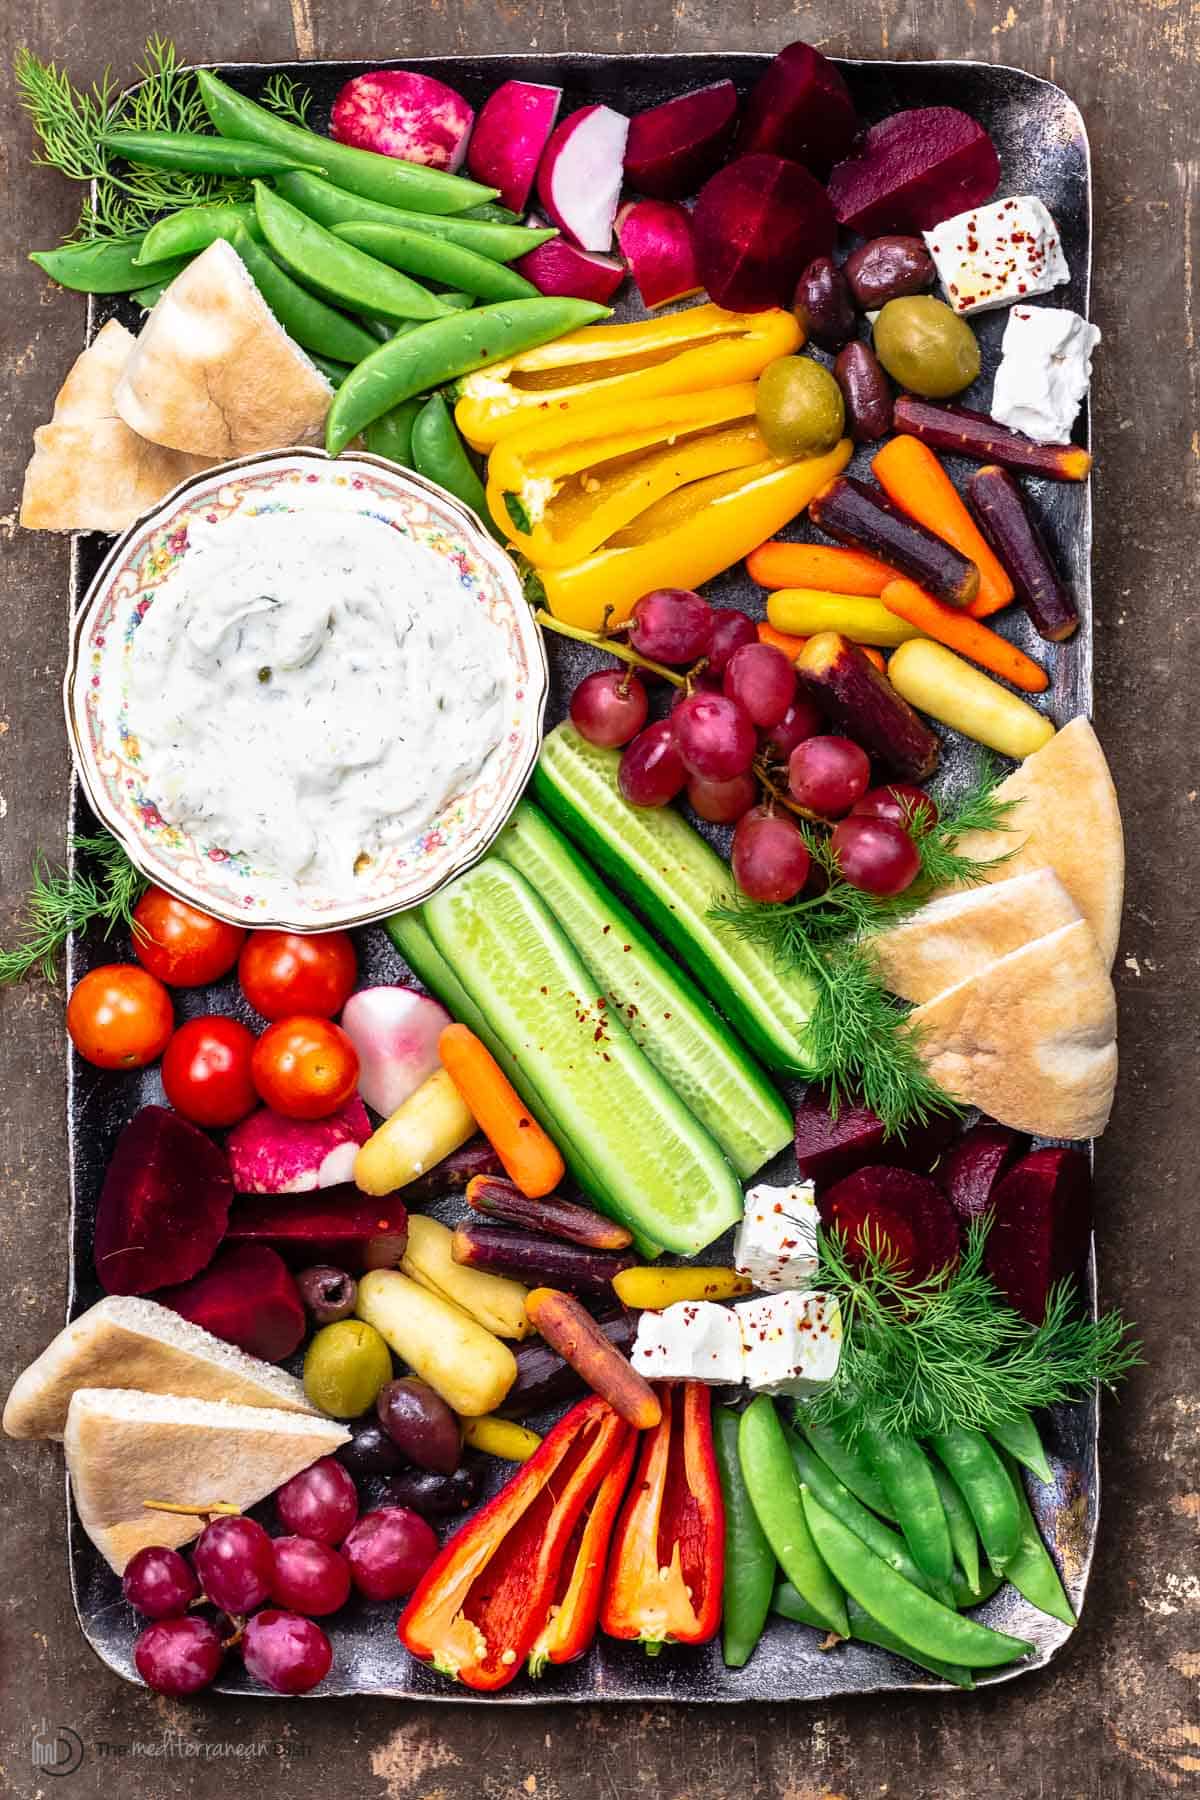 Crudite and tztaziki sauce with pita wedges on a platter